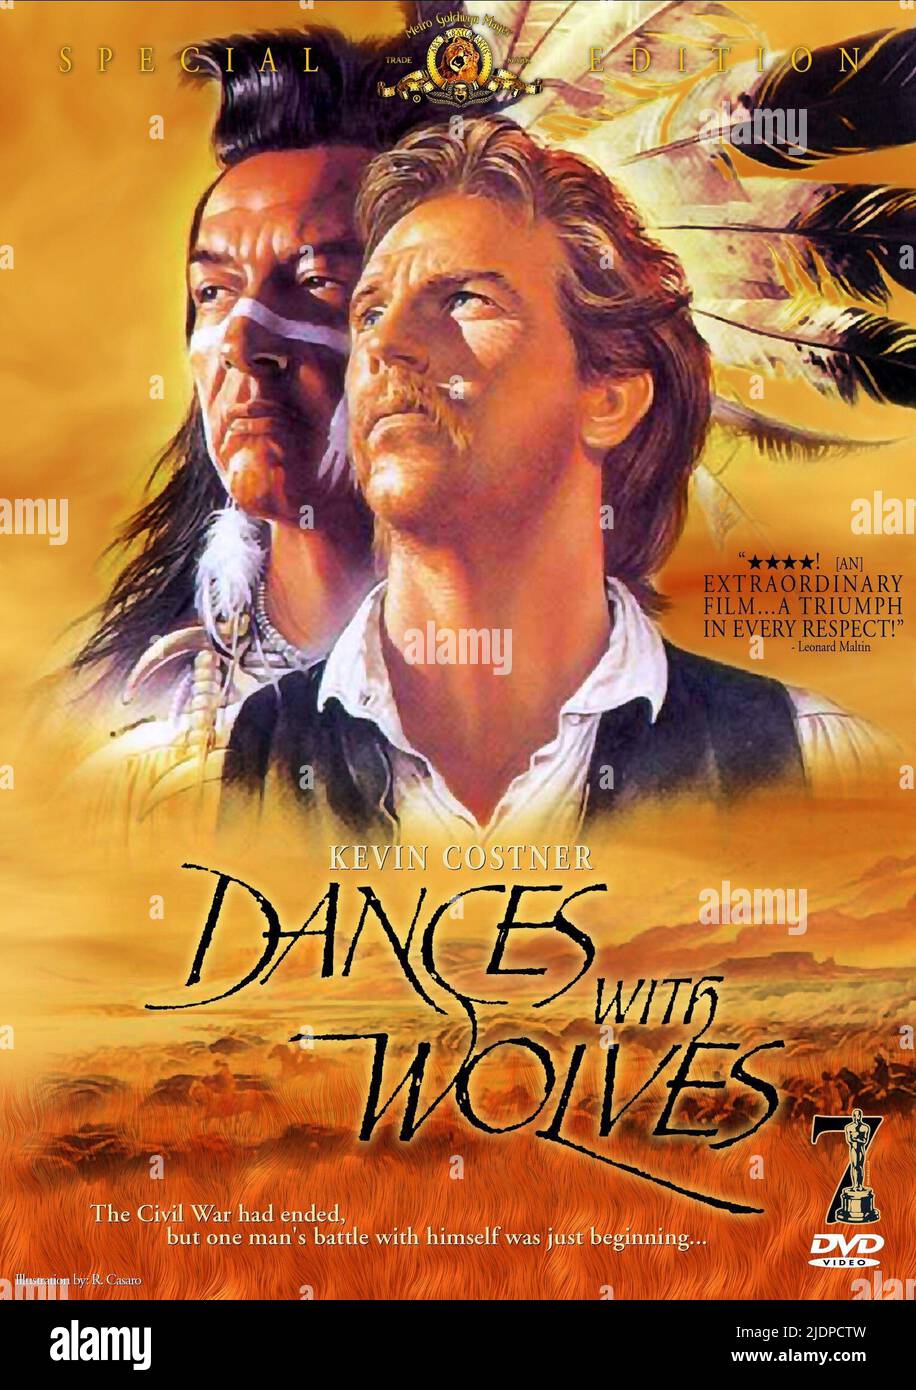 GREENE,POSTER, DANCES WITH WOLVES, 1990 Stock Photo